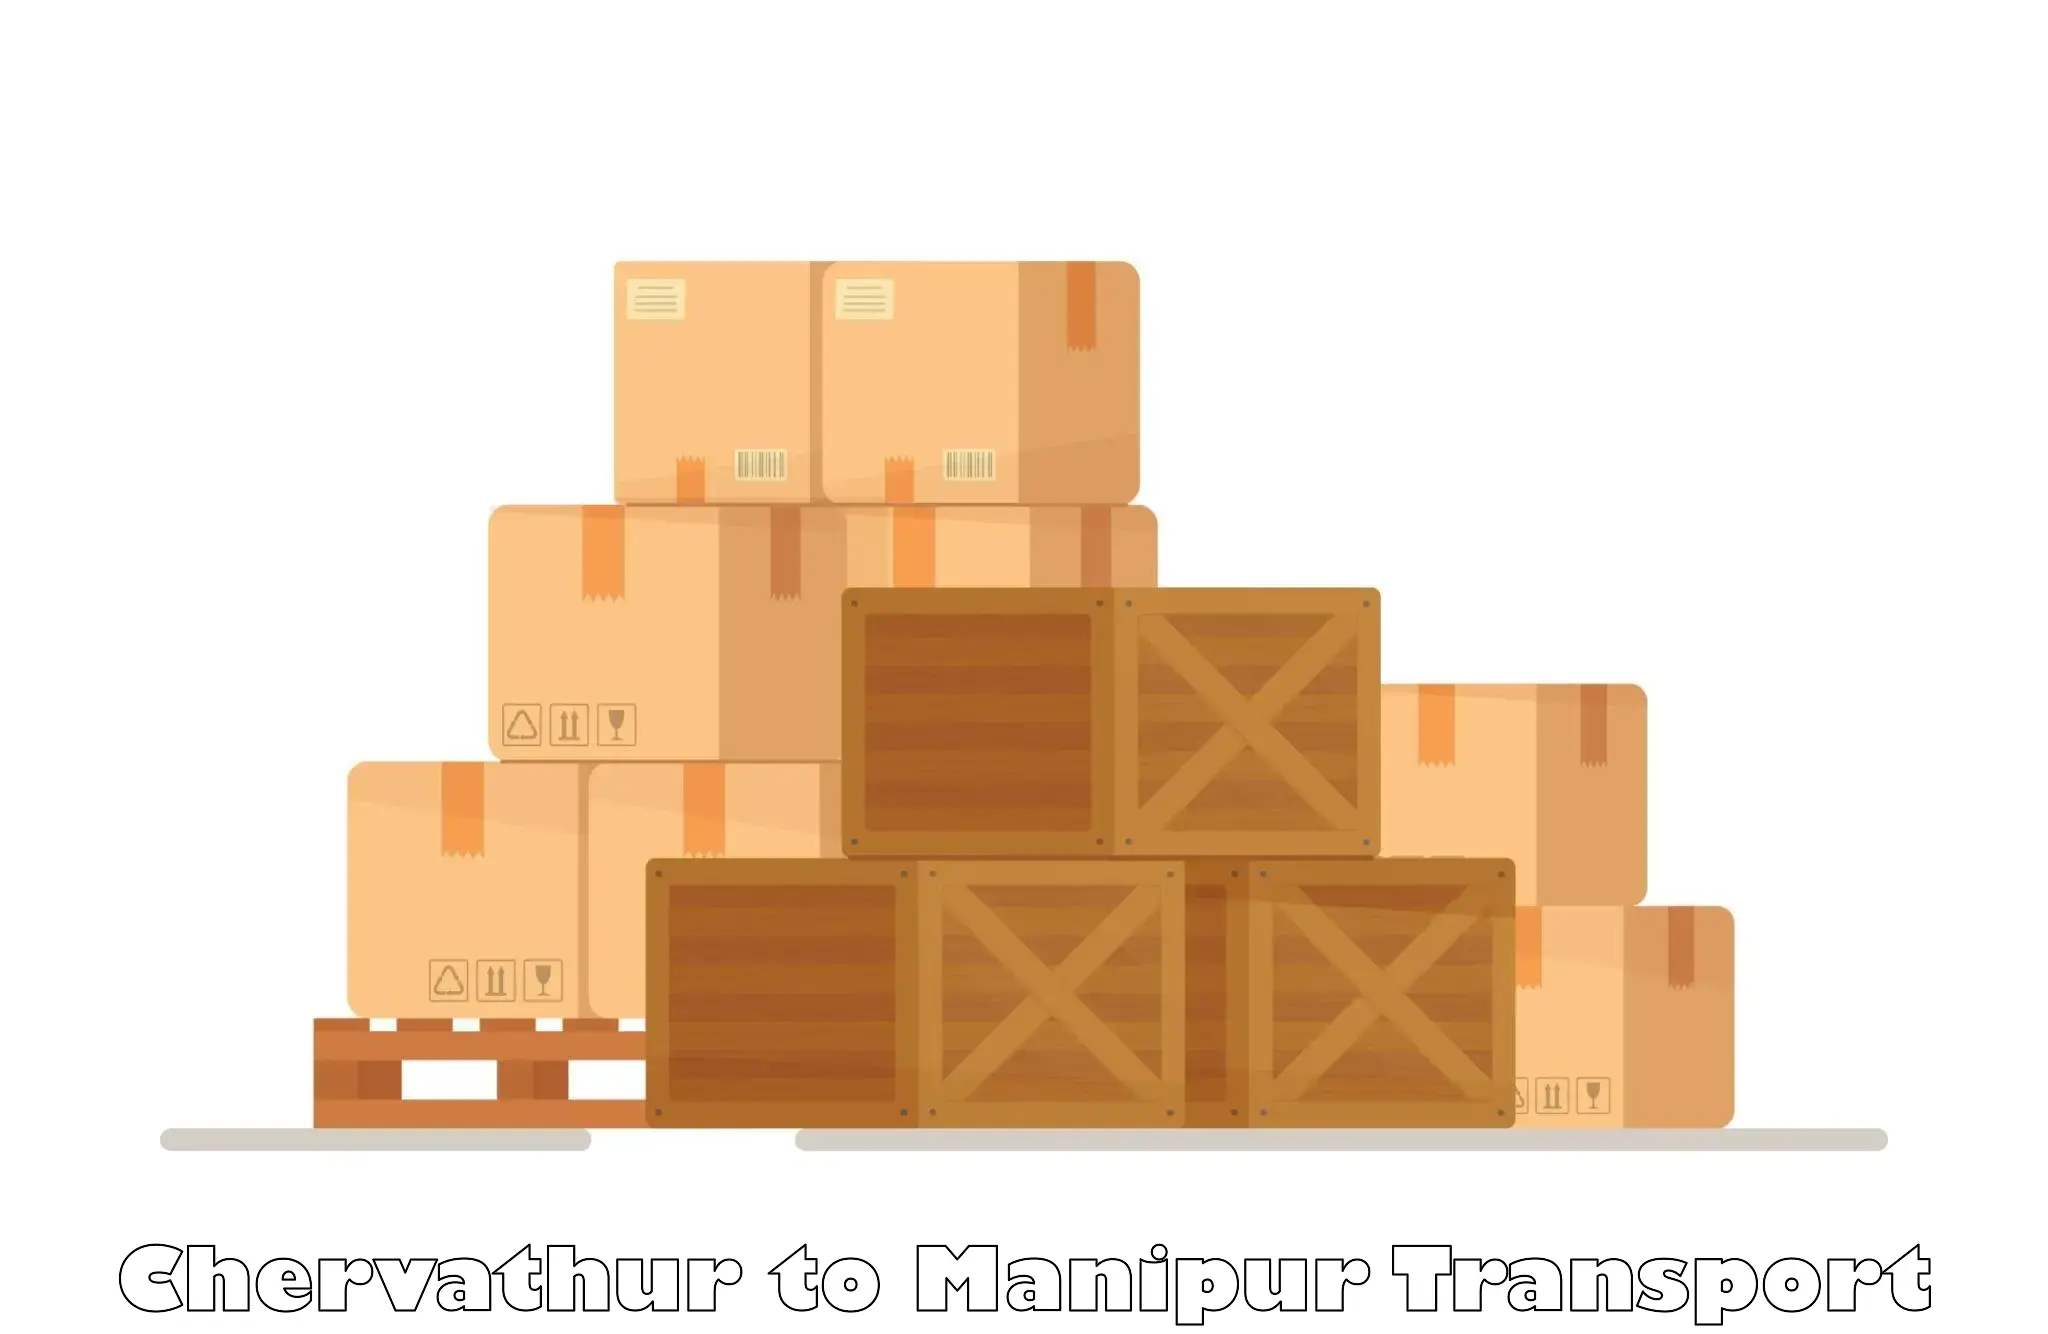 Delivery service Chervathur to Manipur